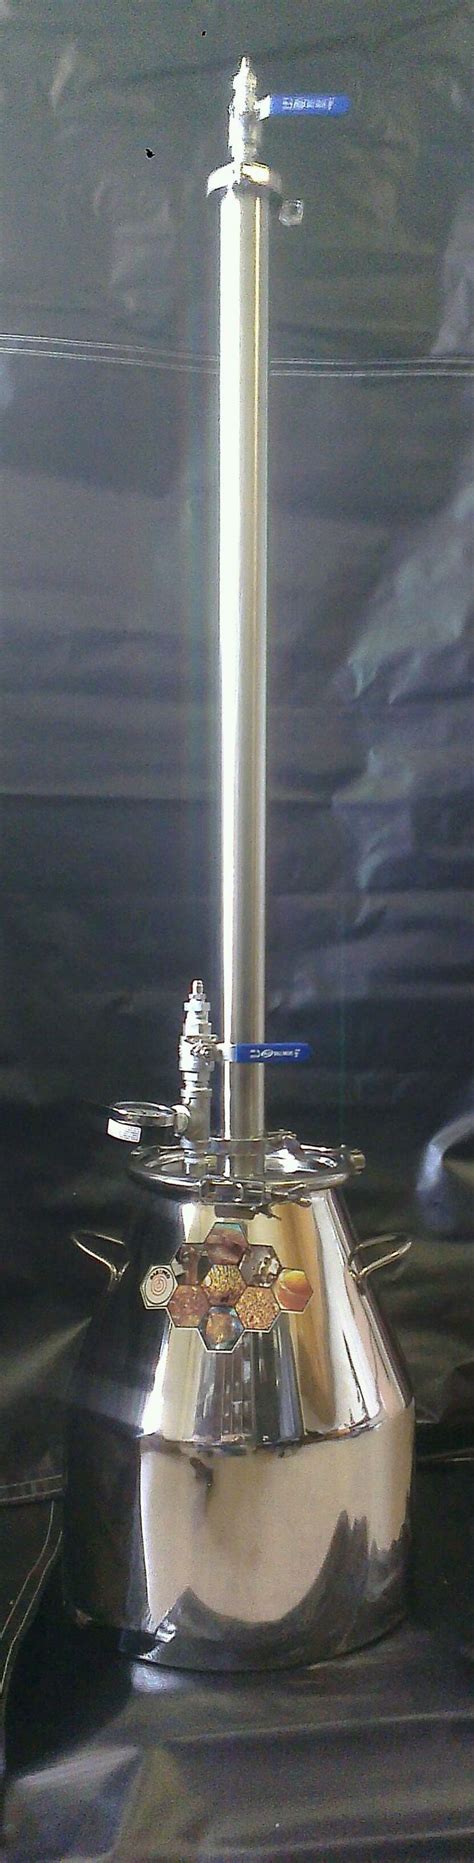 dabzpro dabs extractor butane extractor closed loop reclamation extraction system bho